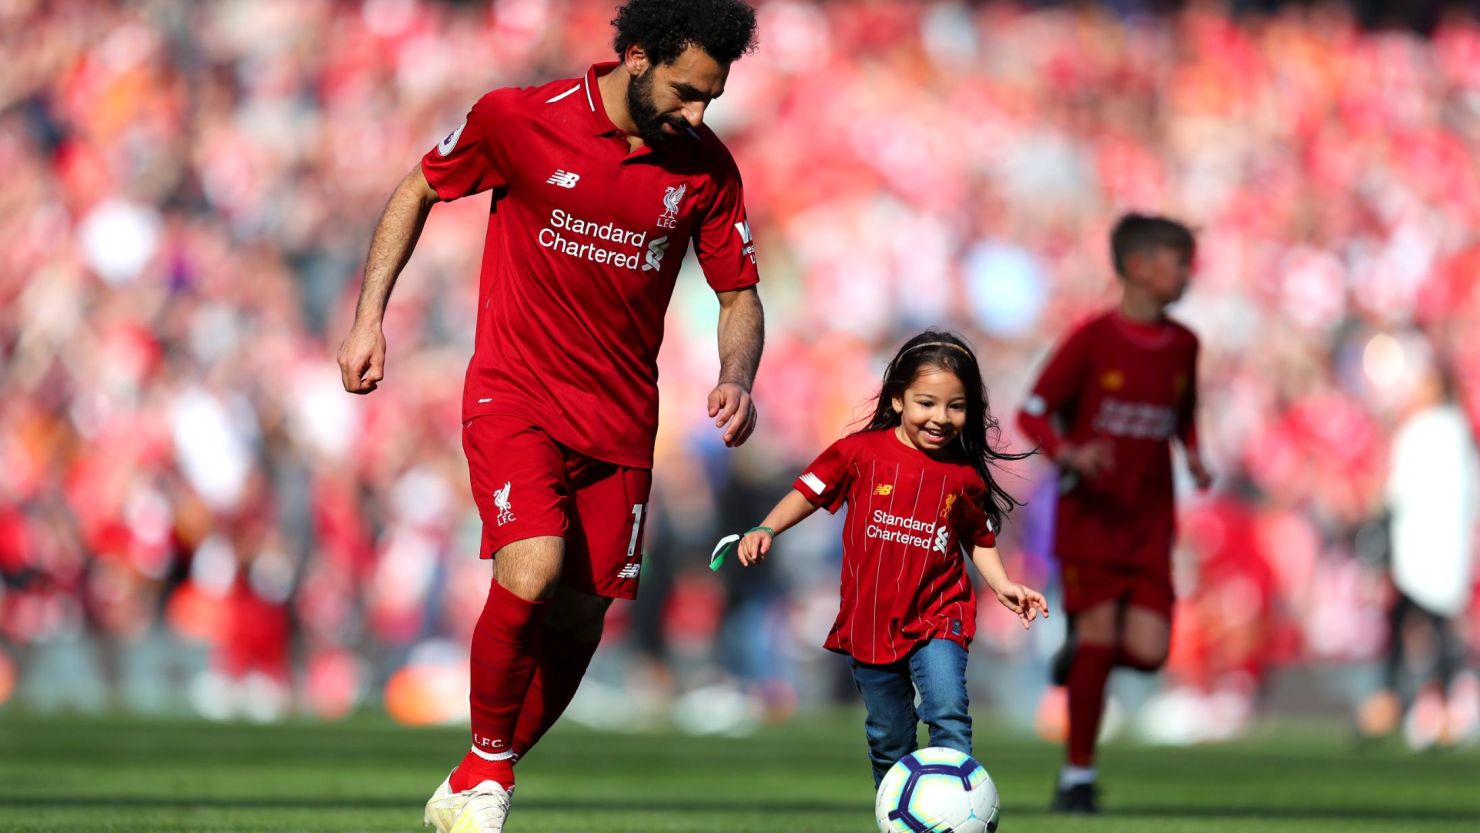 Liverpool supporters could have a new song ... Mo Salah and his daughter running down the wing ...